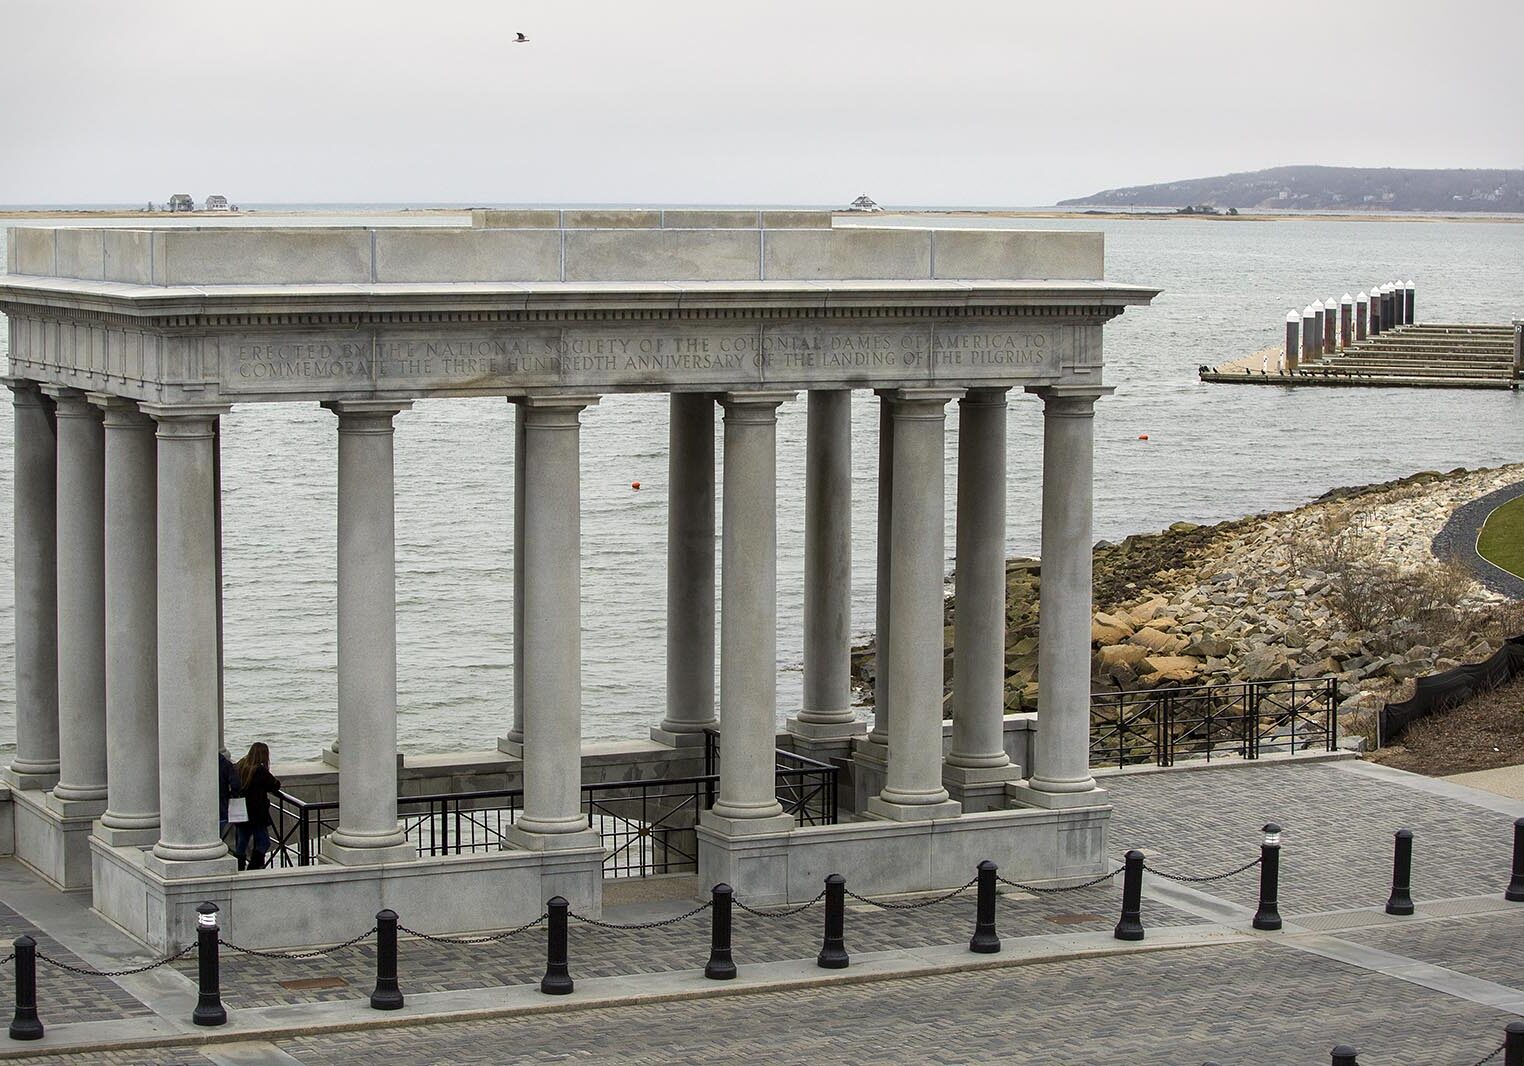 The Plymouth Rock portico looks out across the Plymouth Bay to Rocky Point, the location of Pilgrim Nuclear Power Station. Photo by Robin Lubbock for WBUR